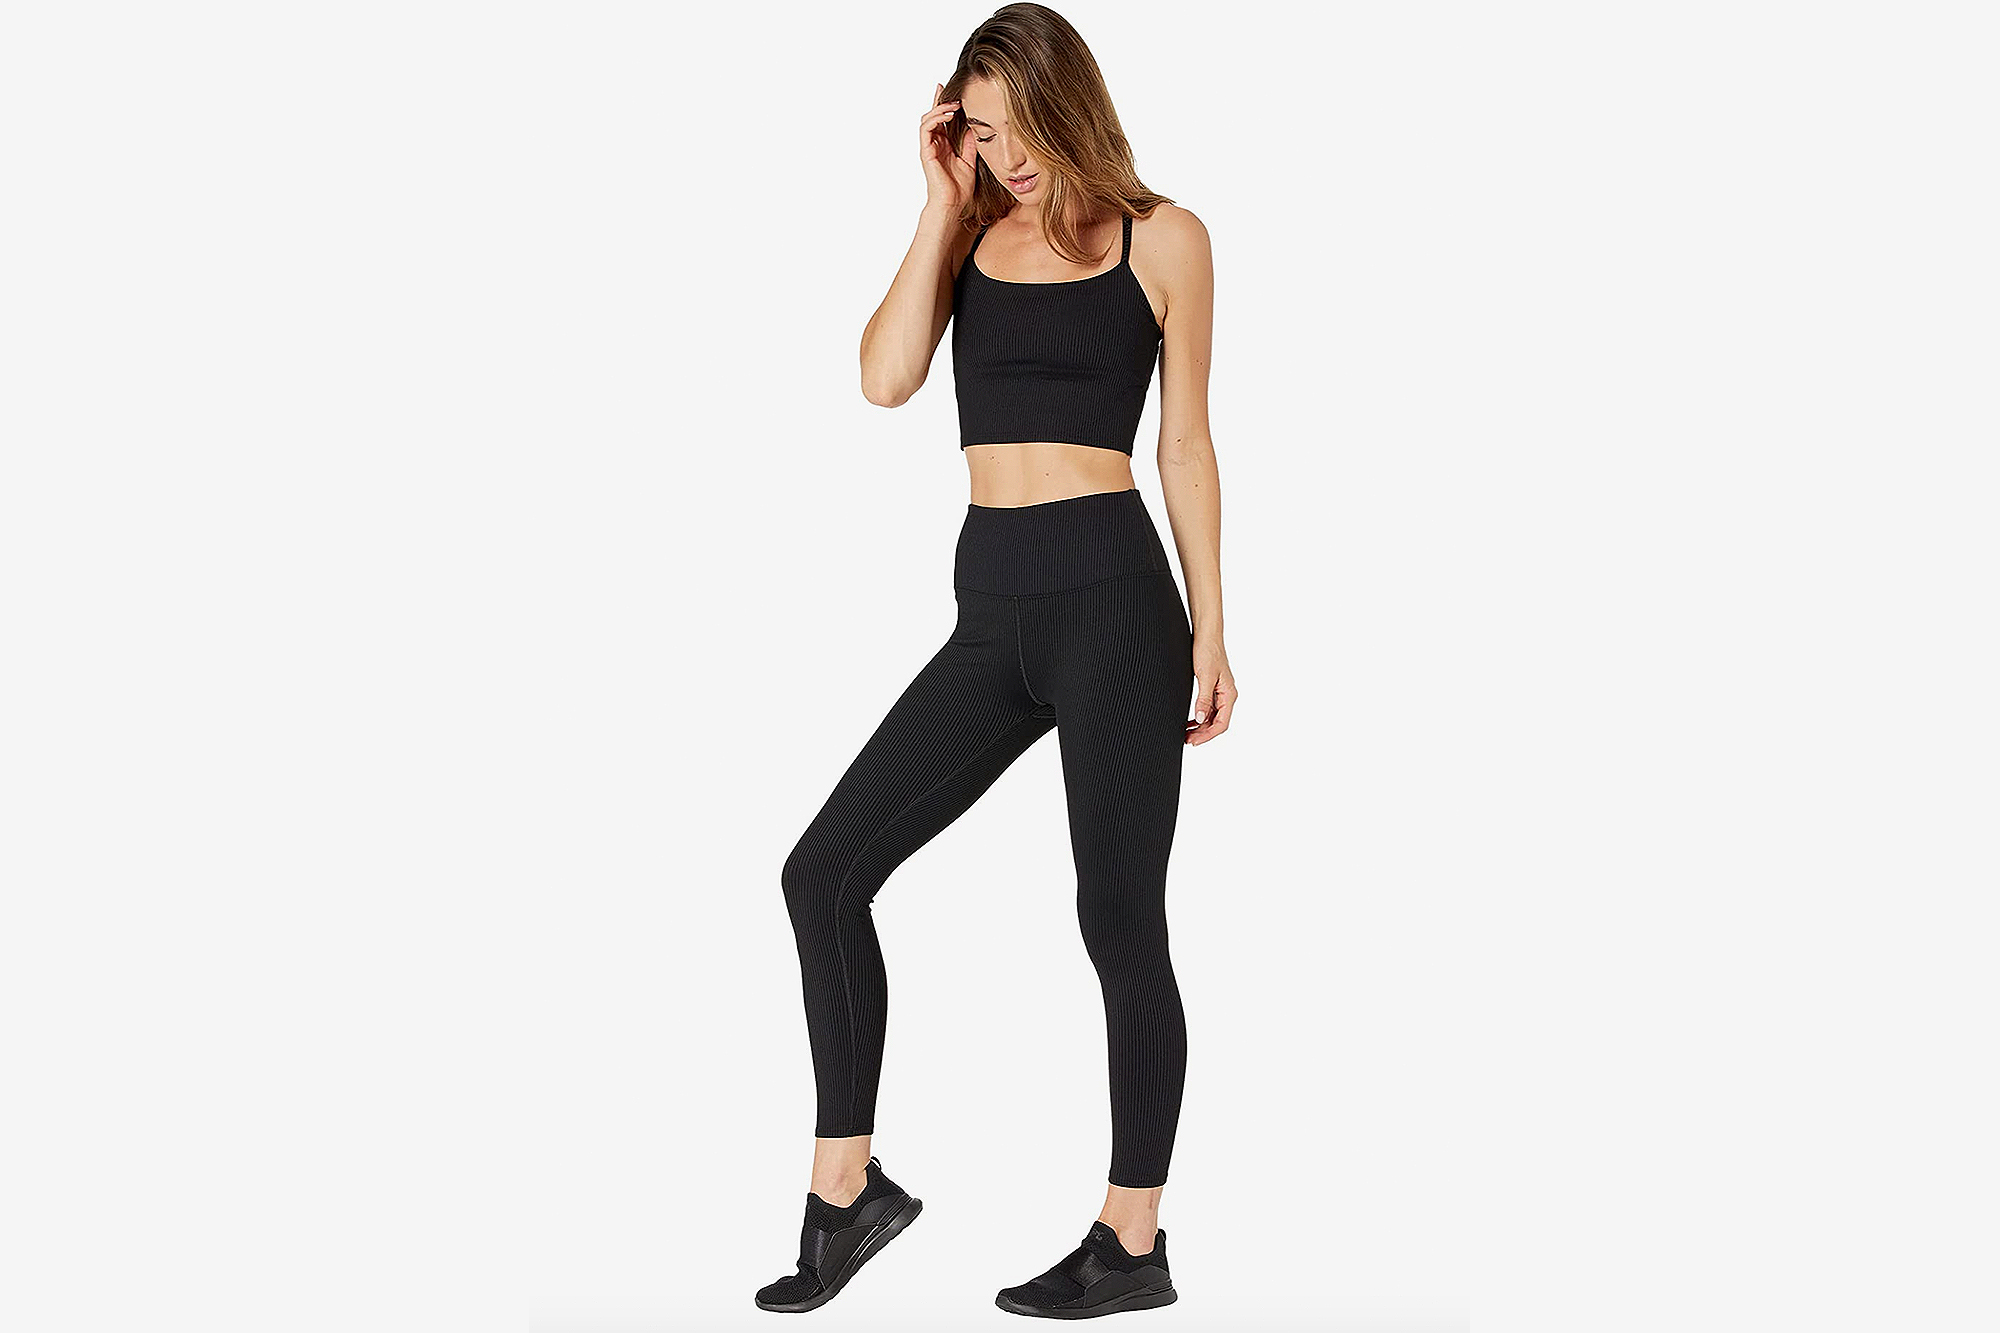 Carbon38 Ribbed Leggings Can Help Hide 'Any Figure Flaws